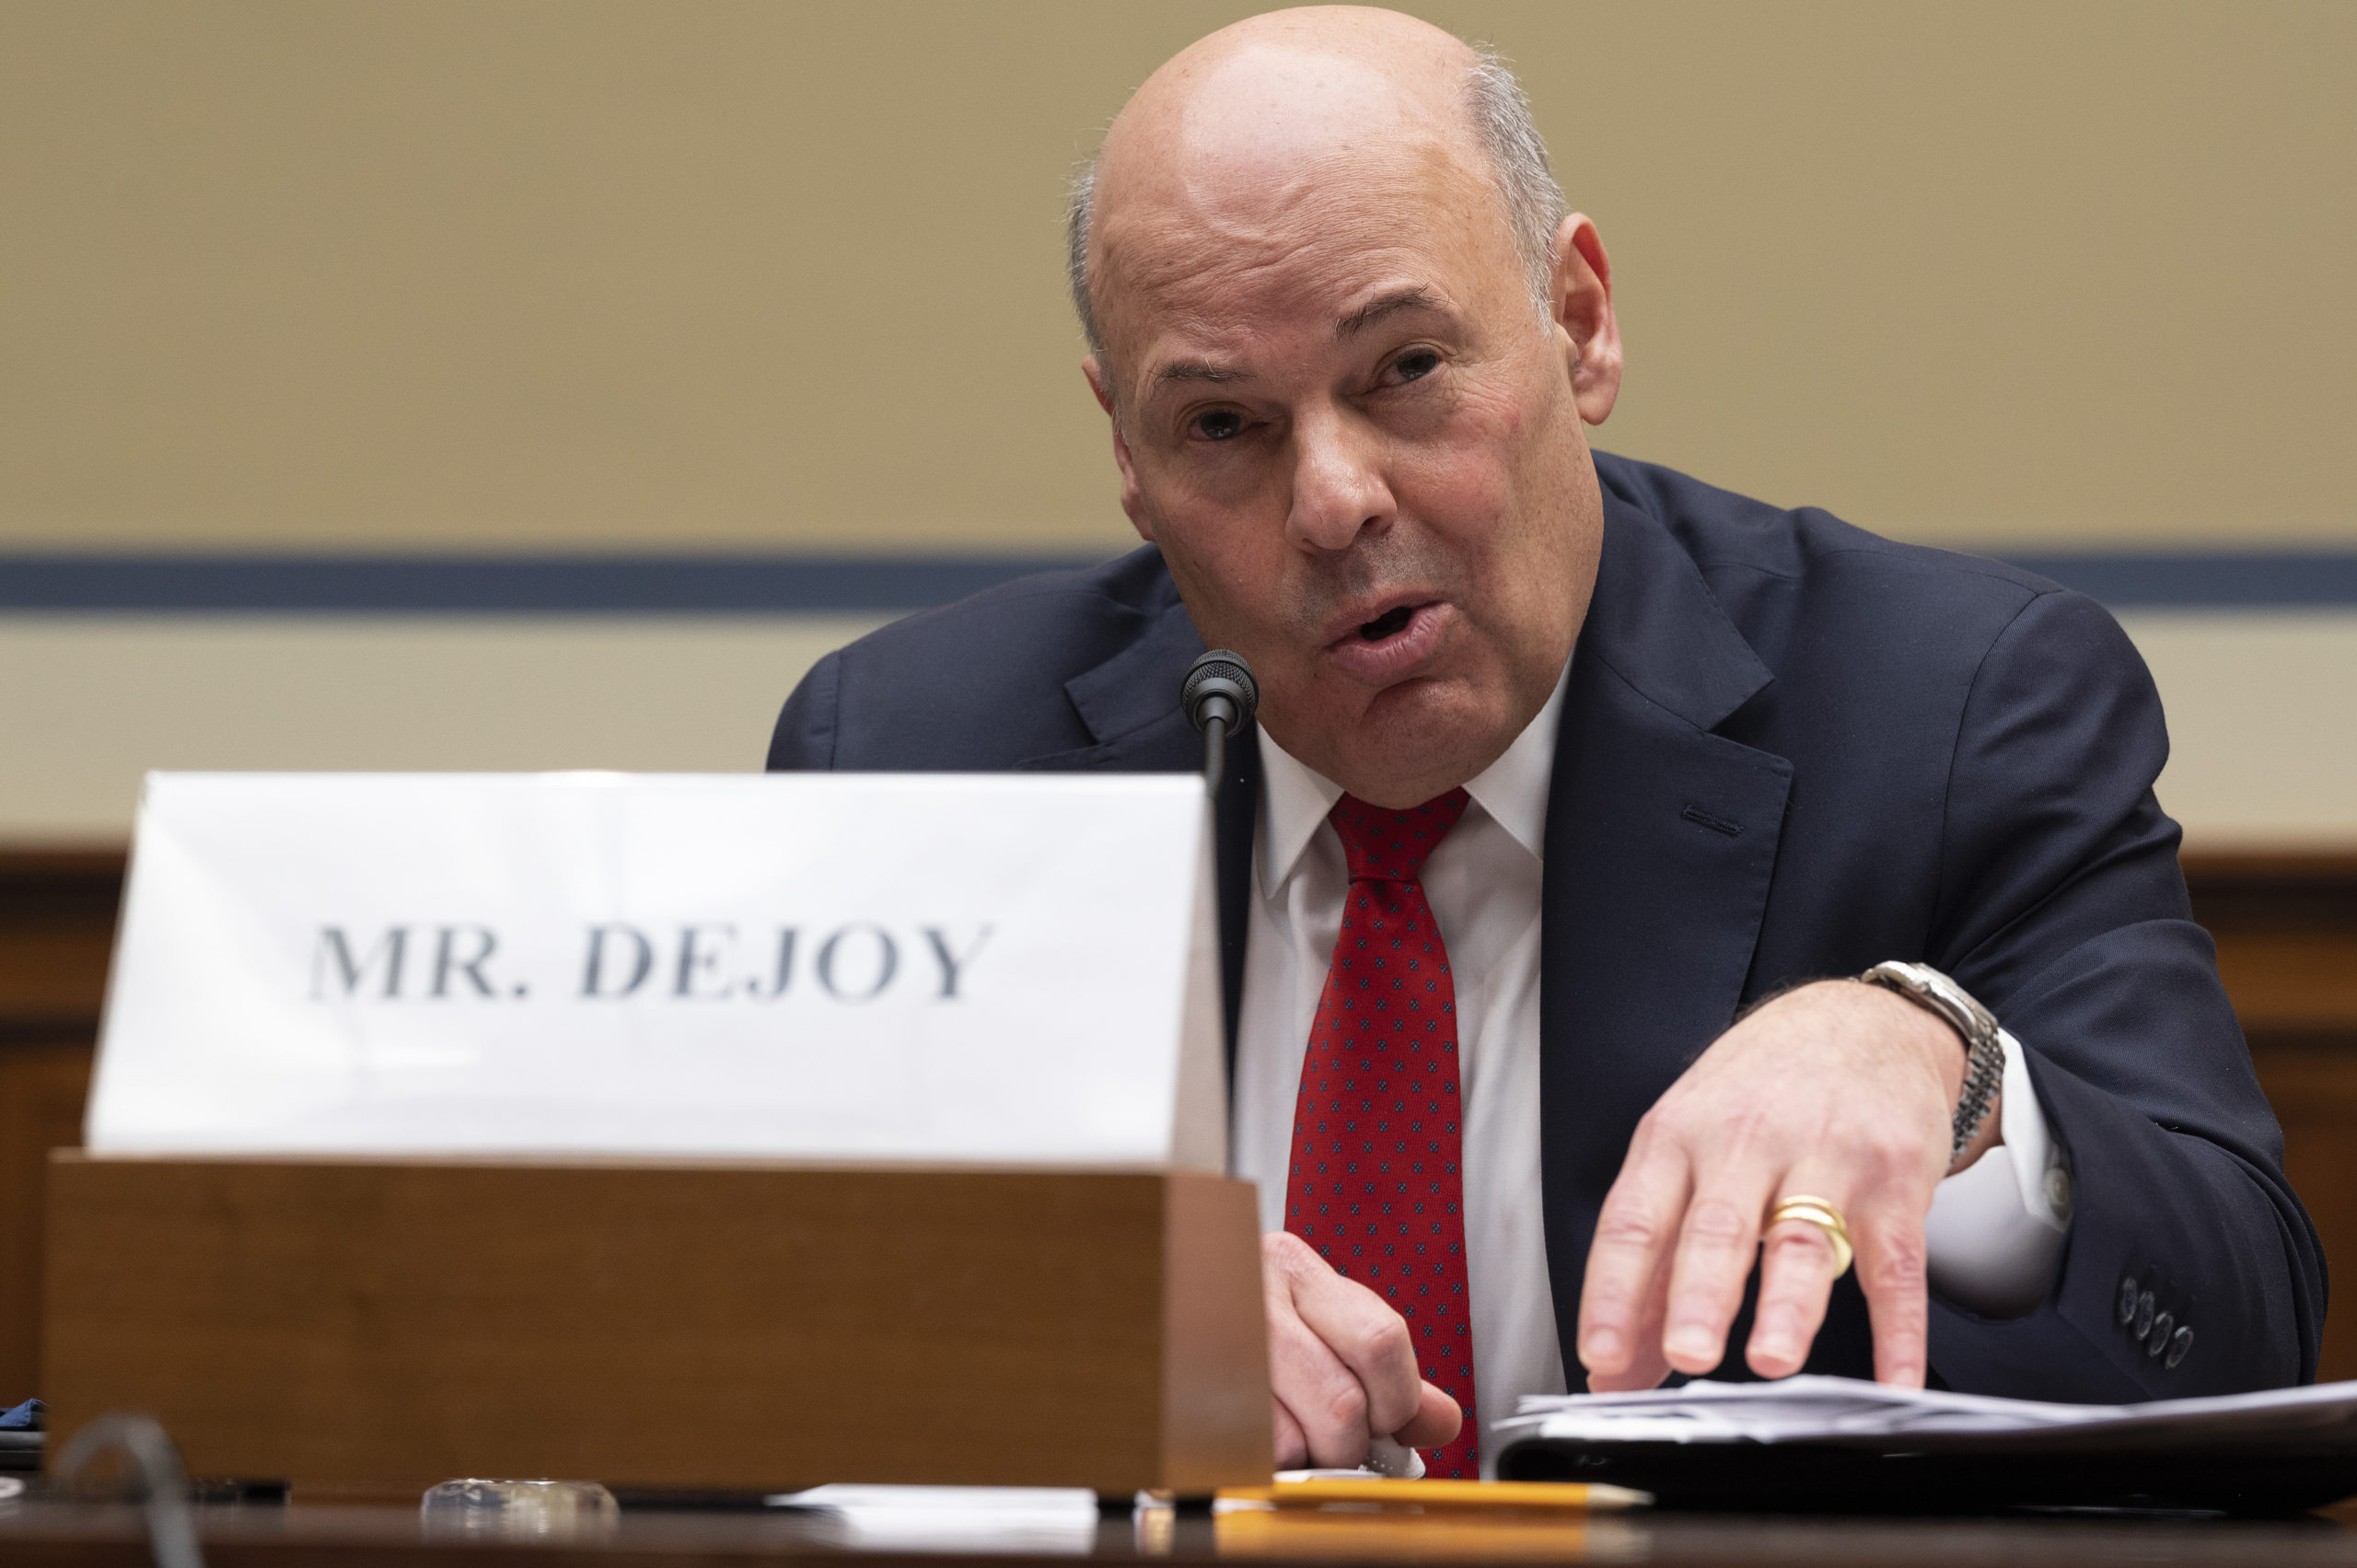 USPS Postmaster General Louis DeJoy testifies during a House Oversight and Reform Committee hearing on Feb. 24 on Capitol Hill. (Jim Watson/Pool/Getty Images)